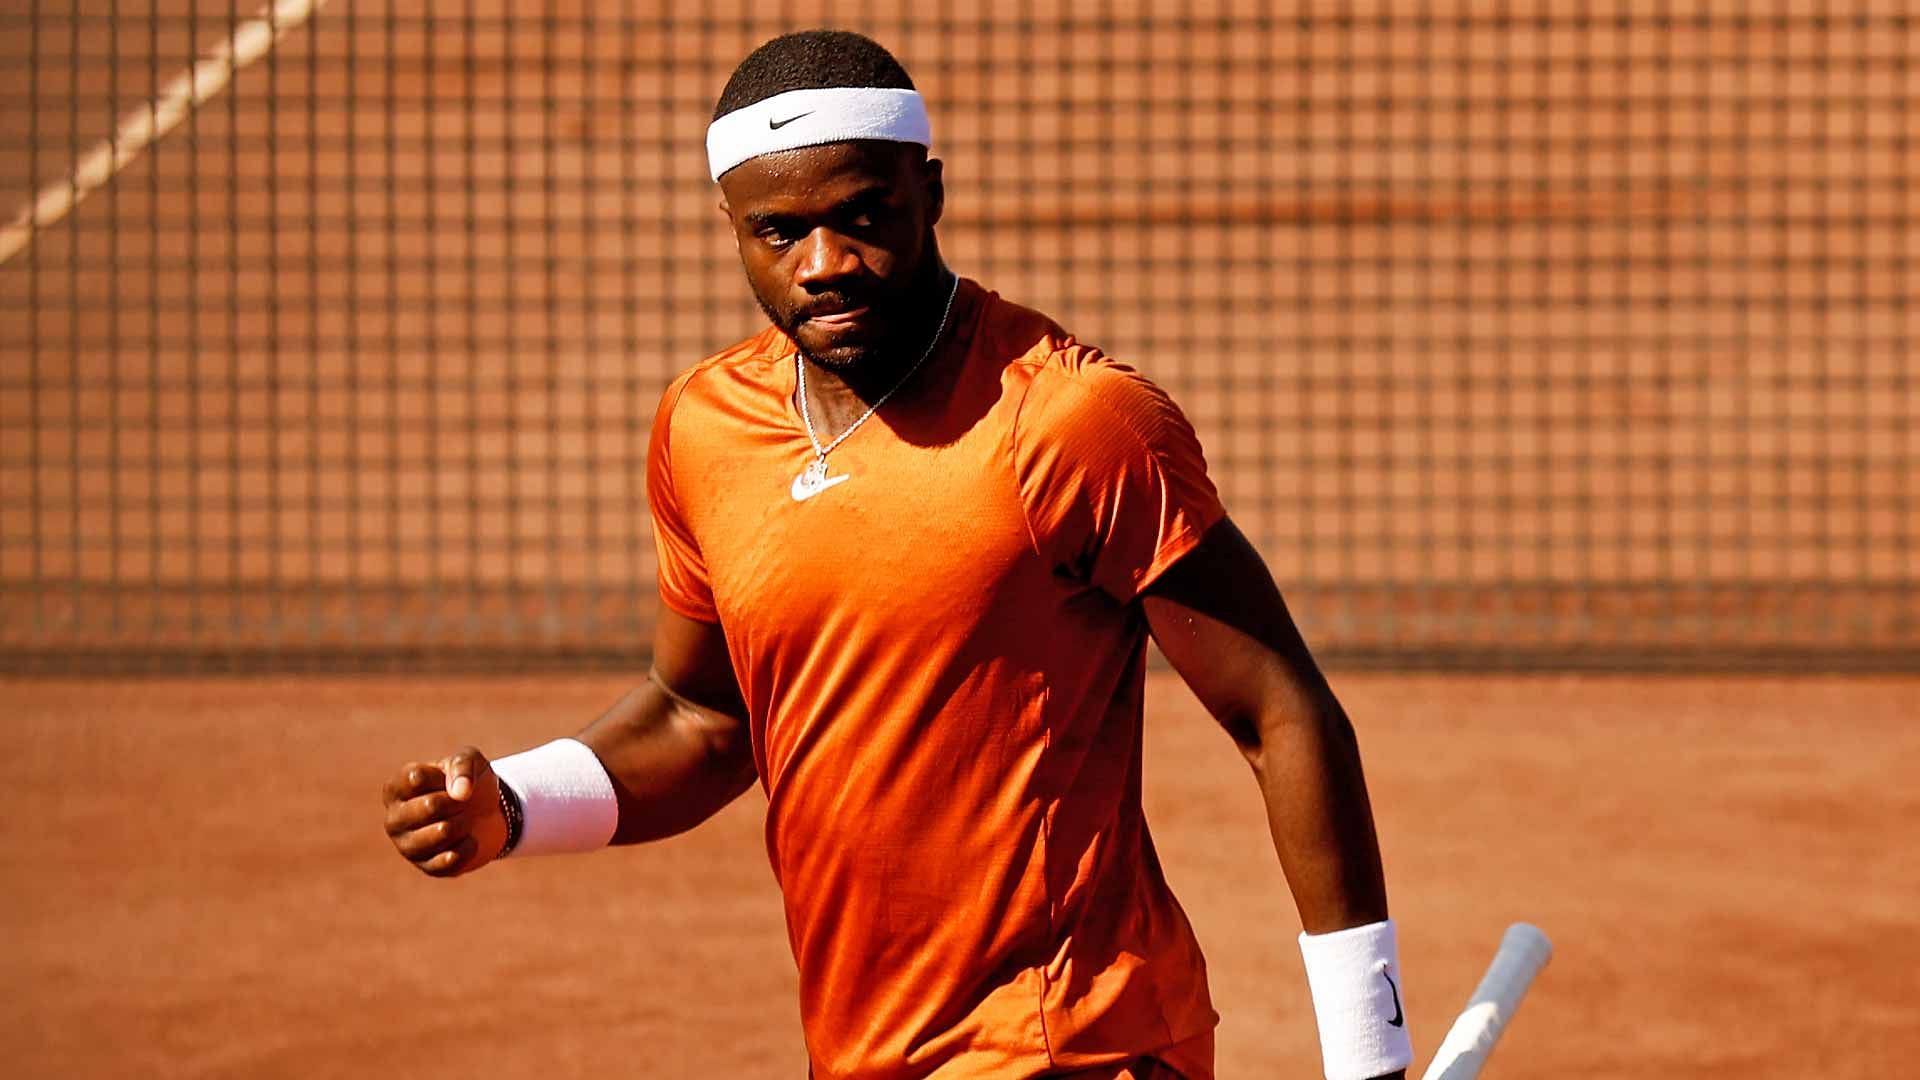 Frances Tiafoe wins the title in Houston